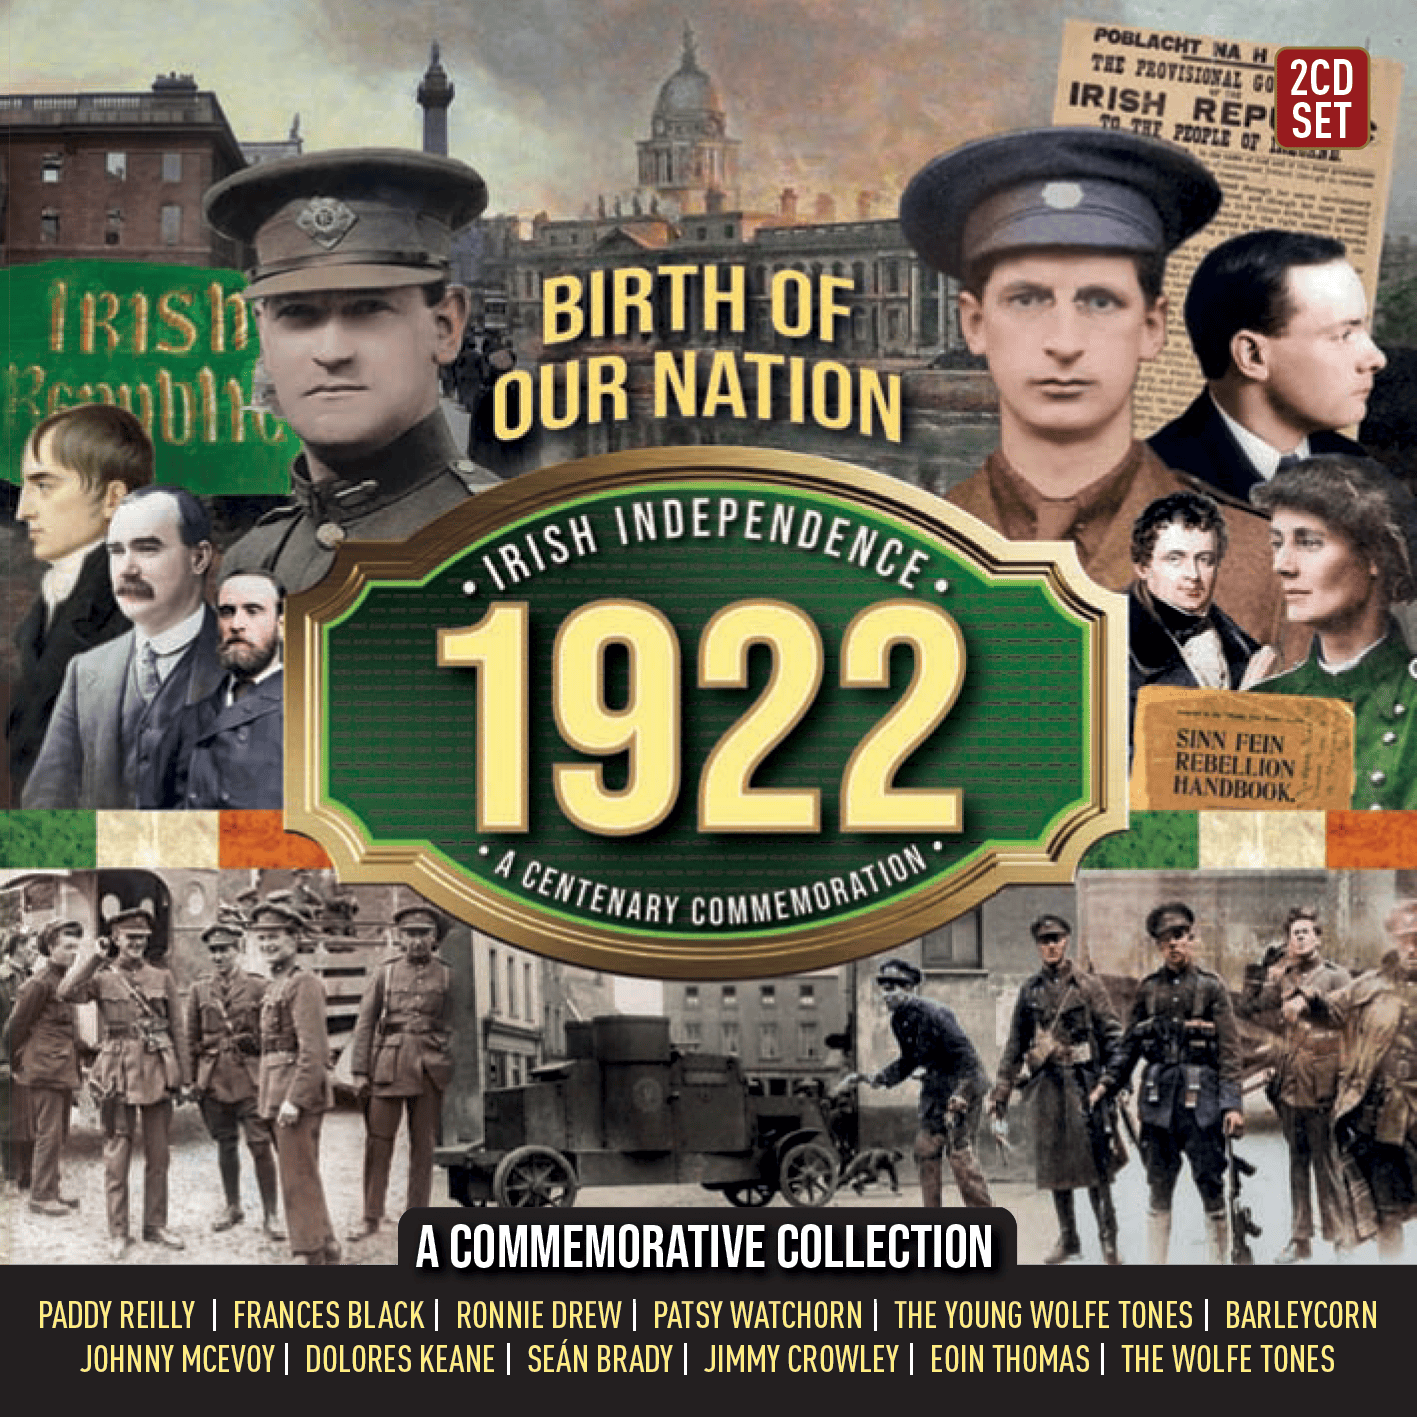 Irish Independence 1922 (A Commemorative Collection) - Various Artists [CD]